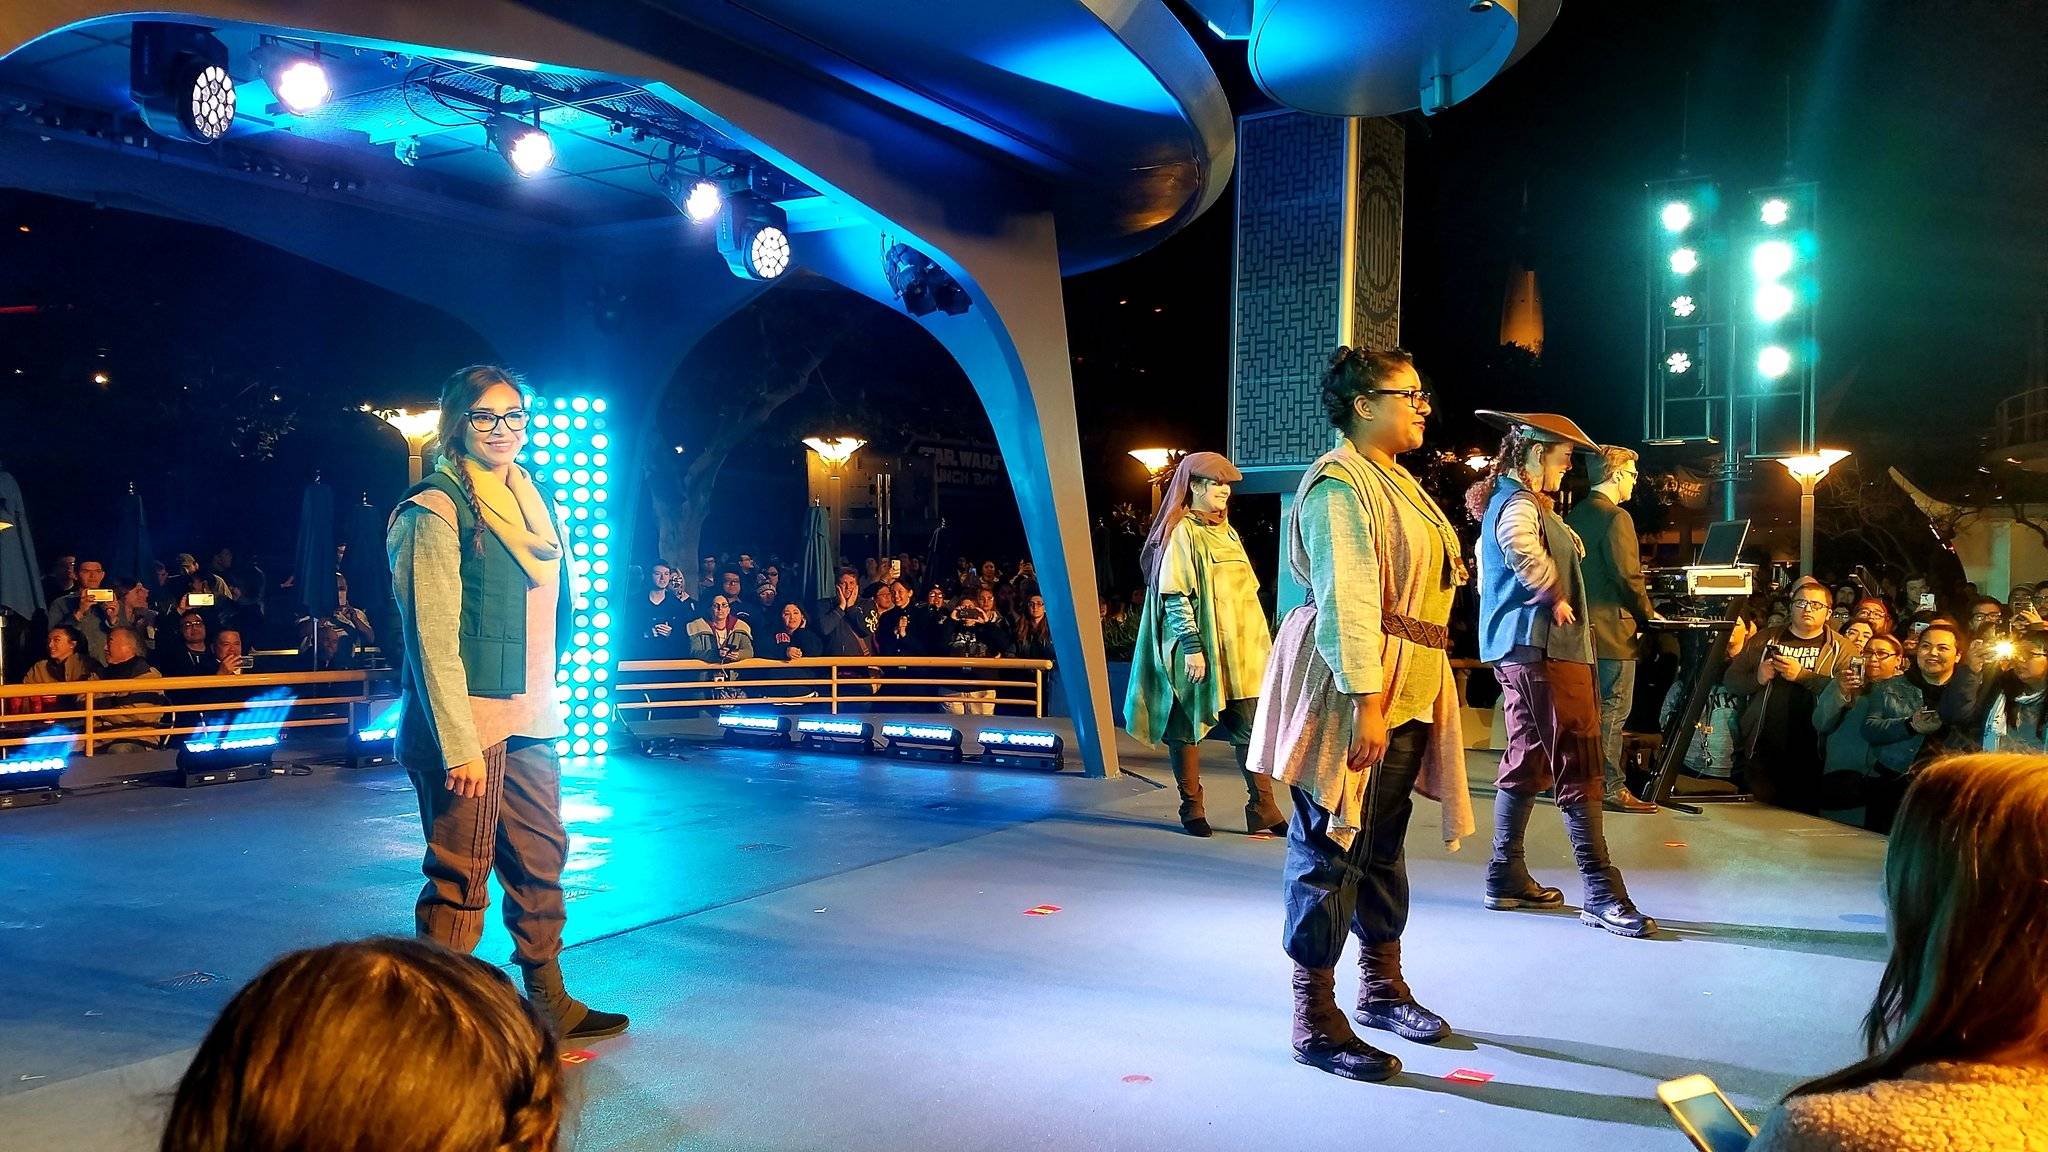 PHOTOS - First look at Star Wars Galaxy's Edge cast member costumes